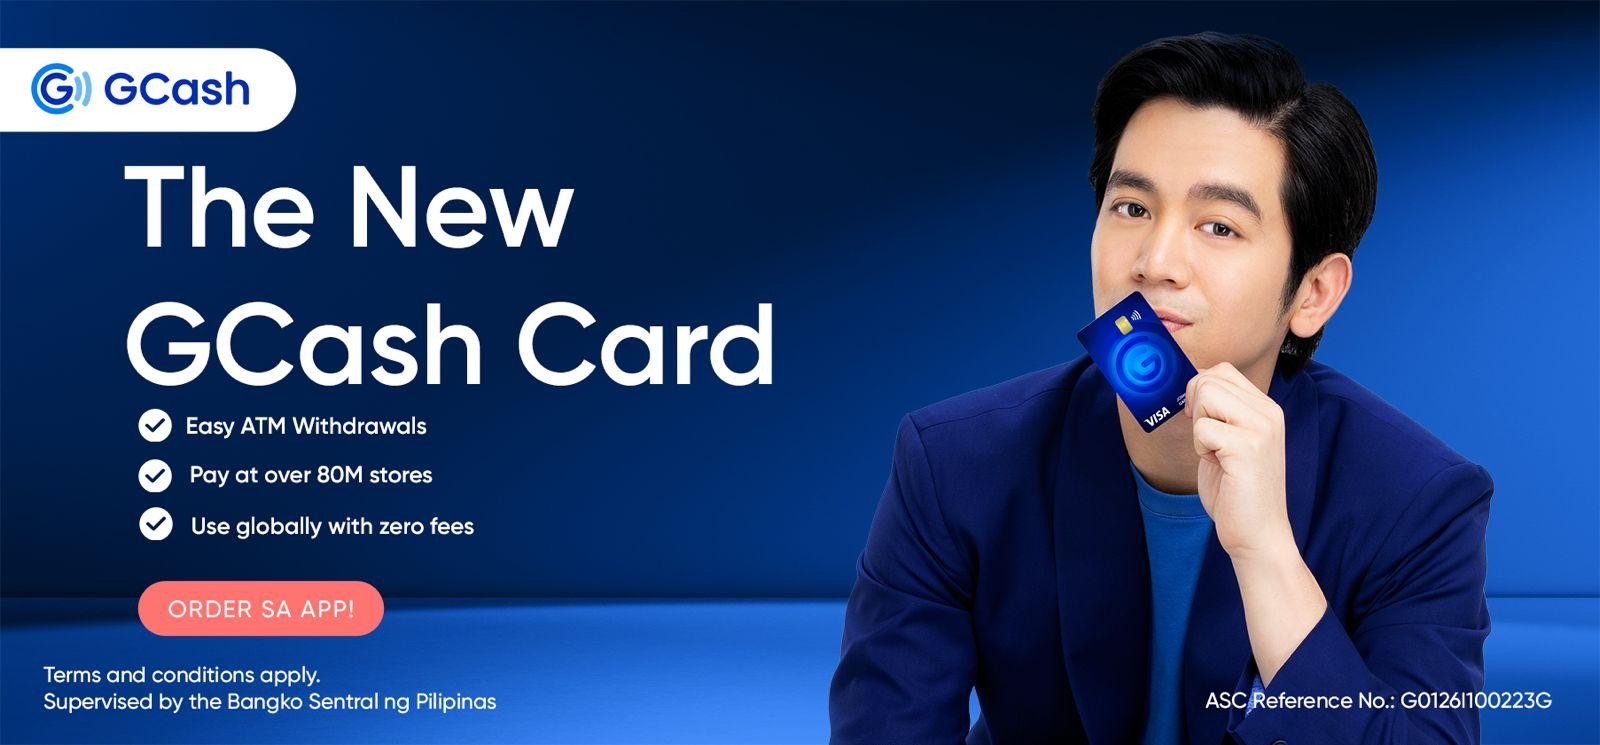 GCash and Visa join forces with the launch of the GCash Card